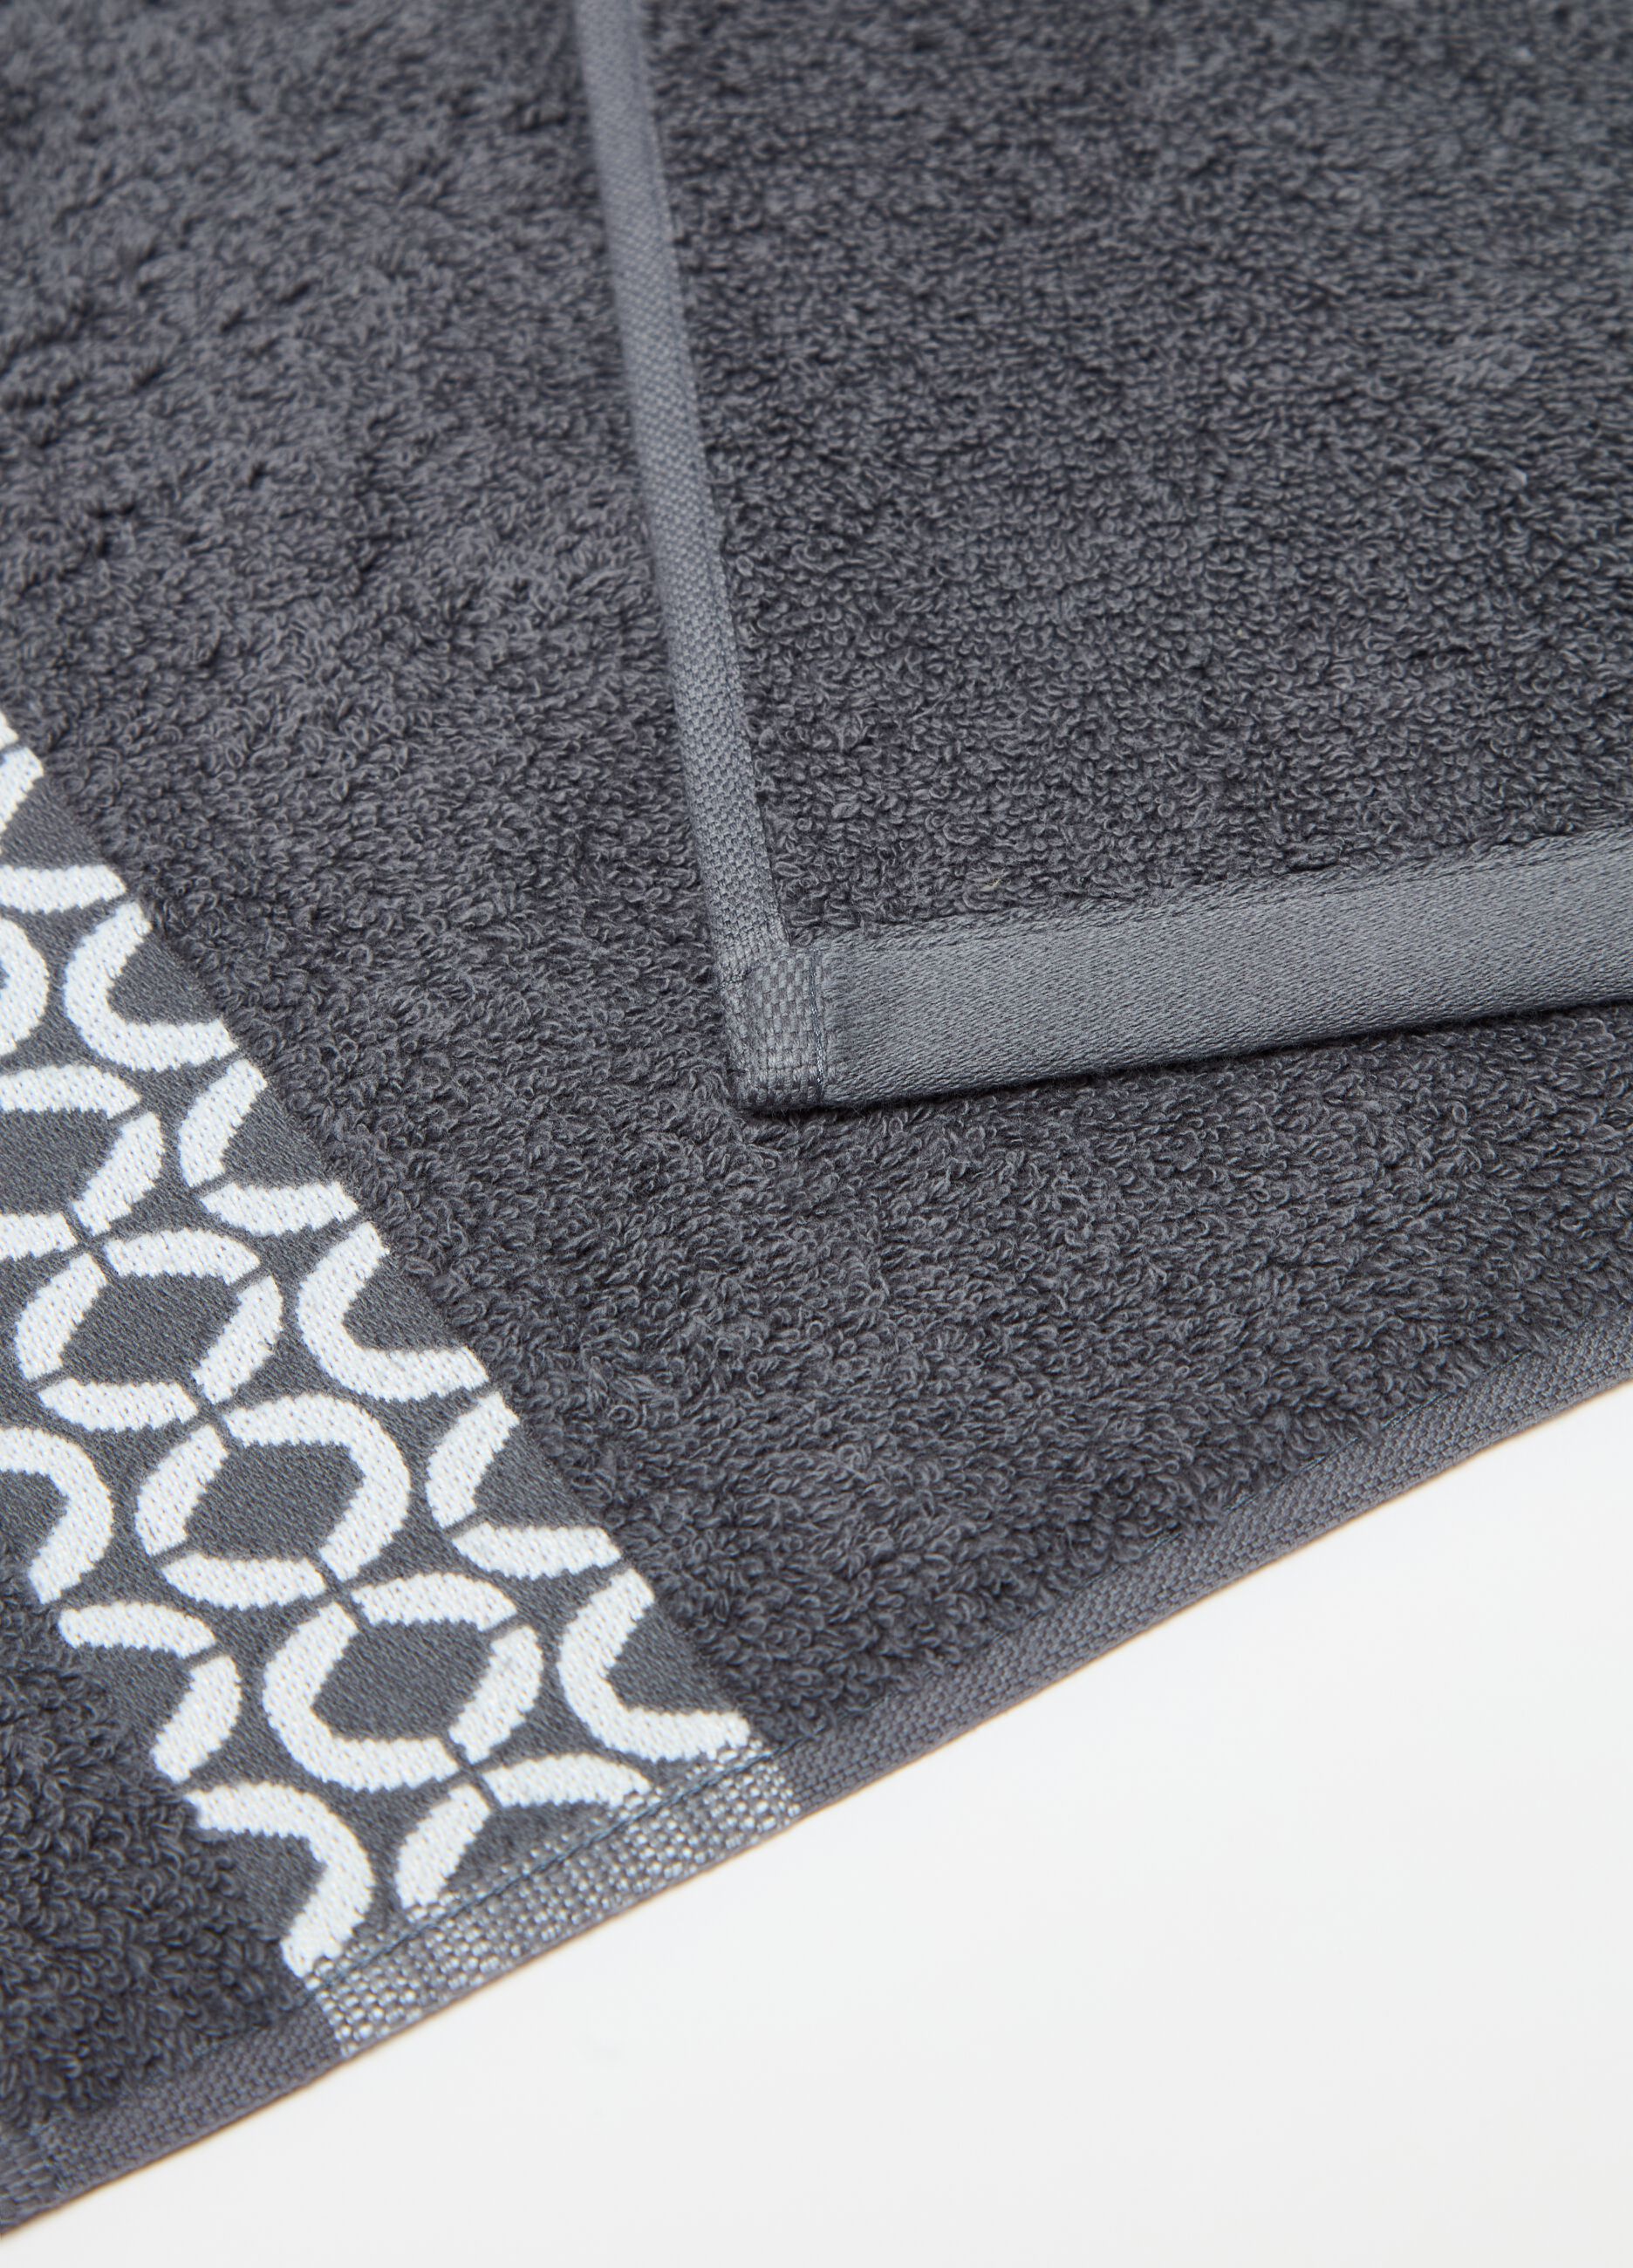 Guest towel with dots patterned trim